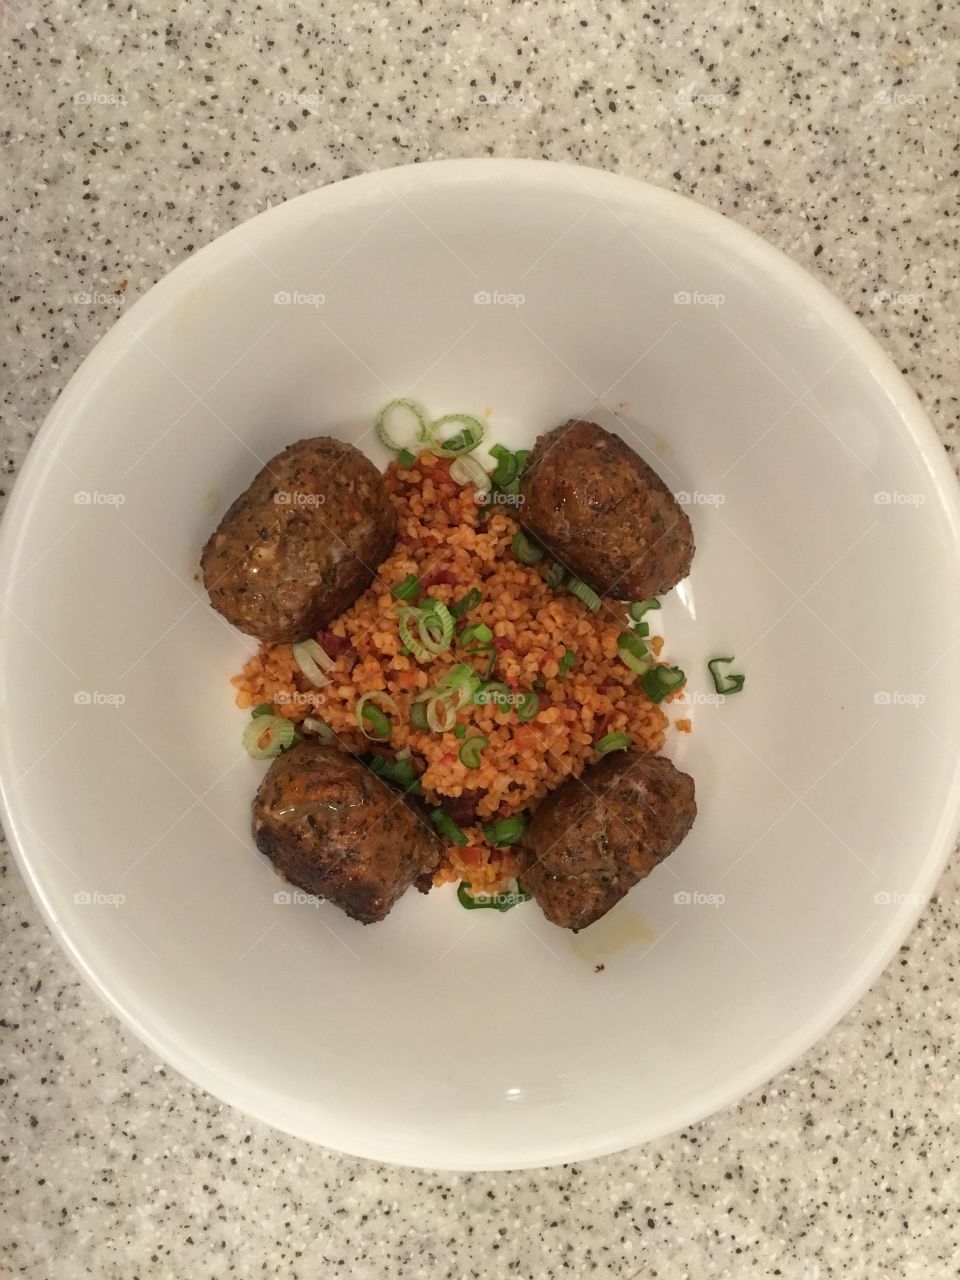 Minted lamb koftes with harissa spiced bulgar wheat and spring onions